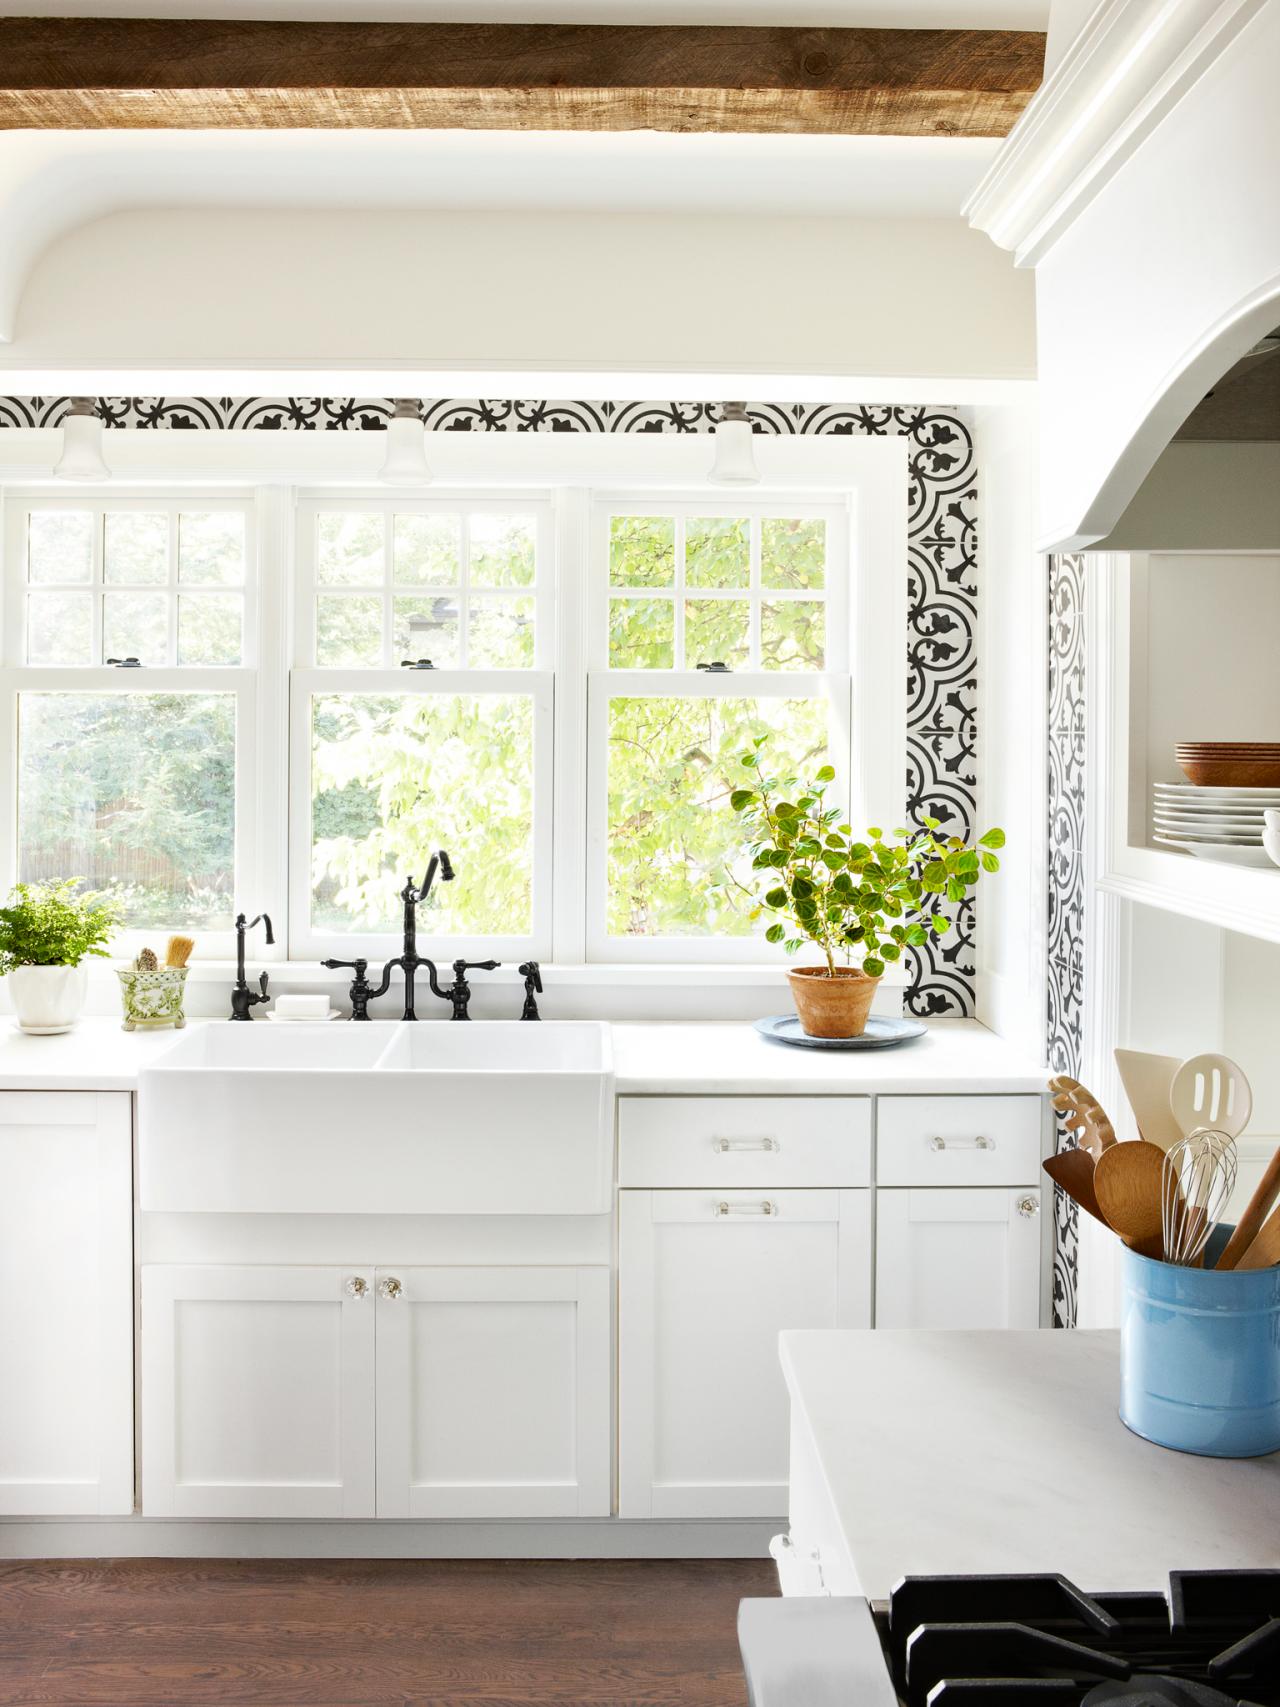 A Small Kitchen With Big Decorating Ideas   HGTV